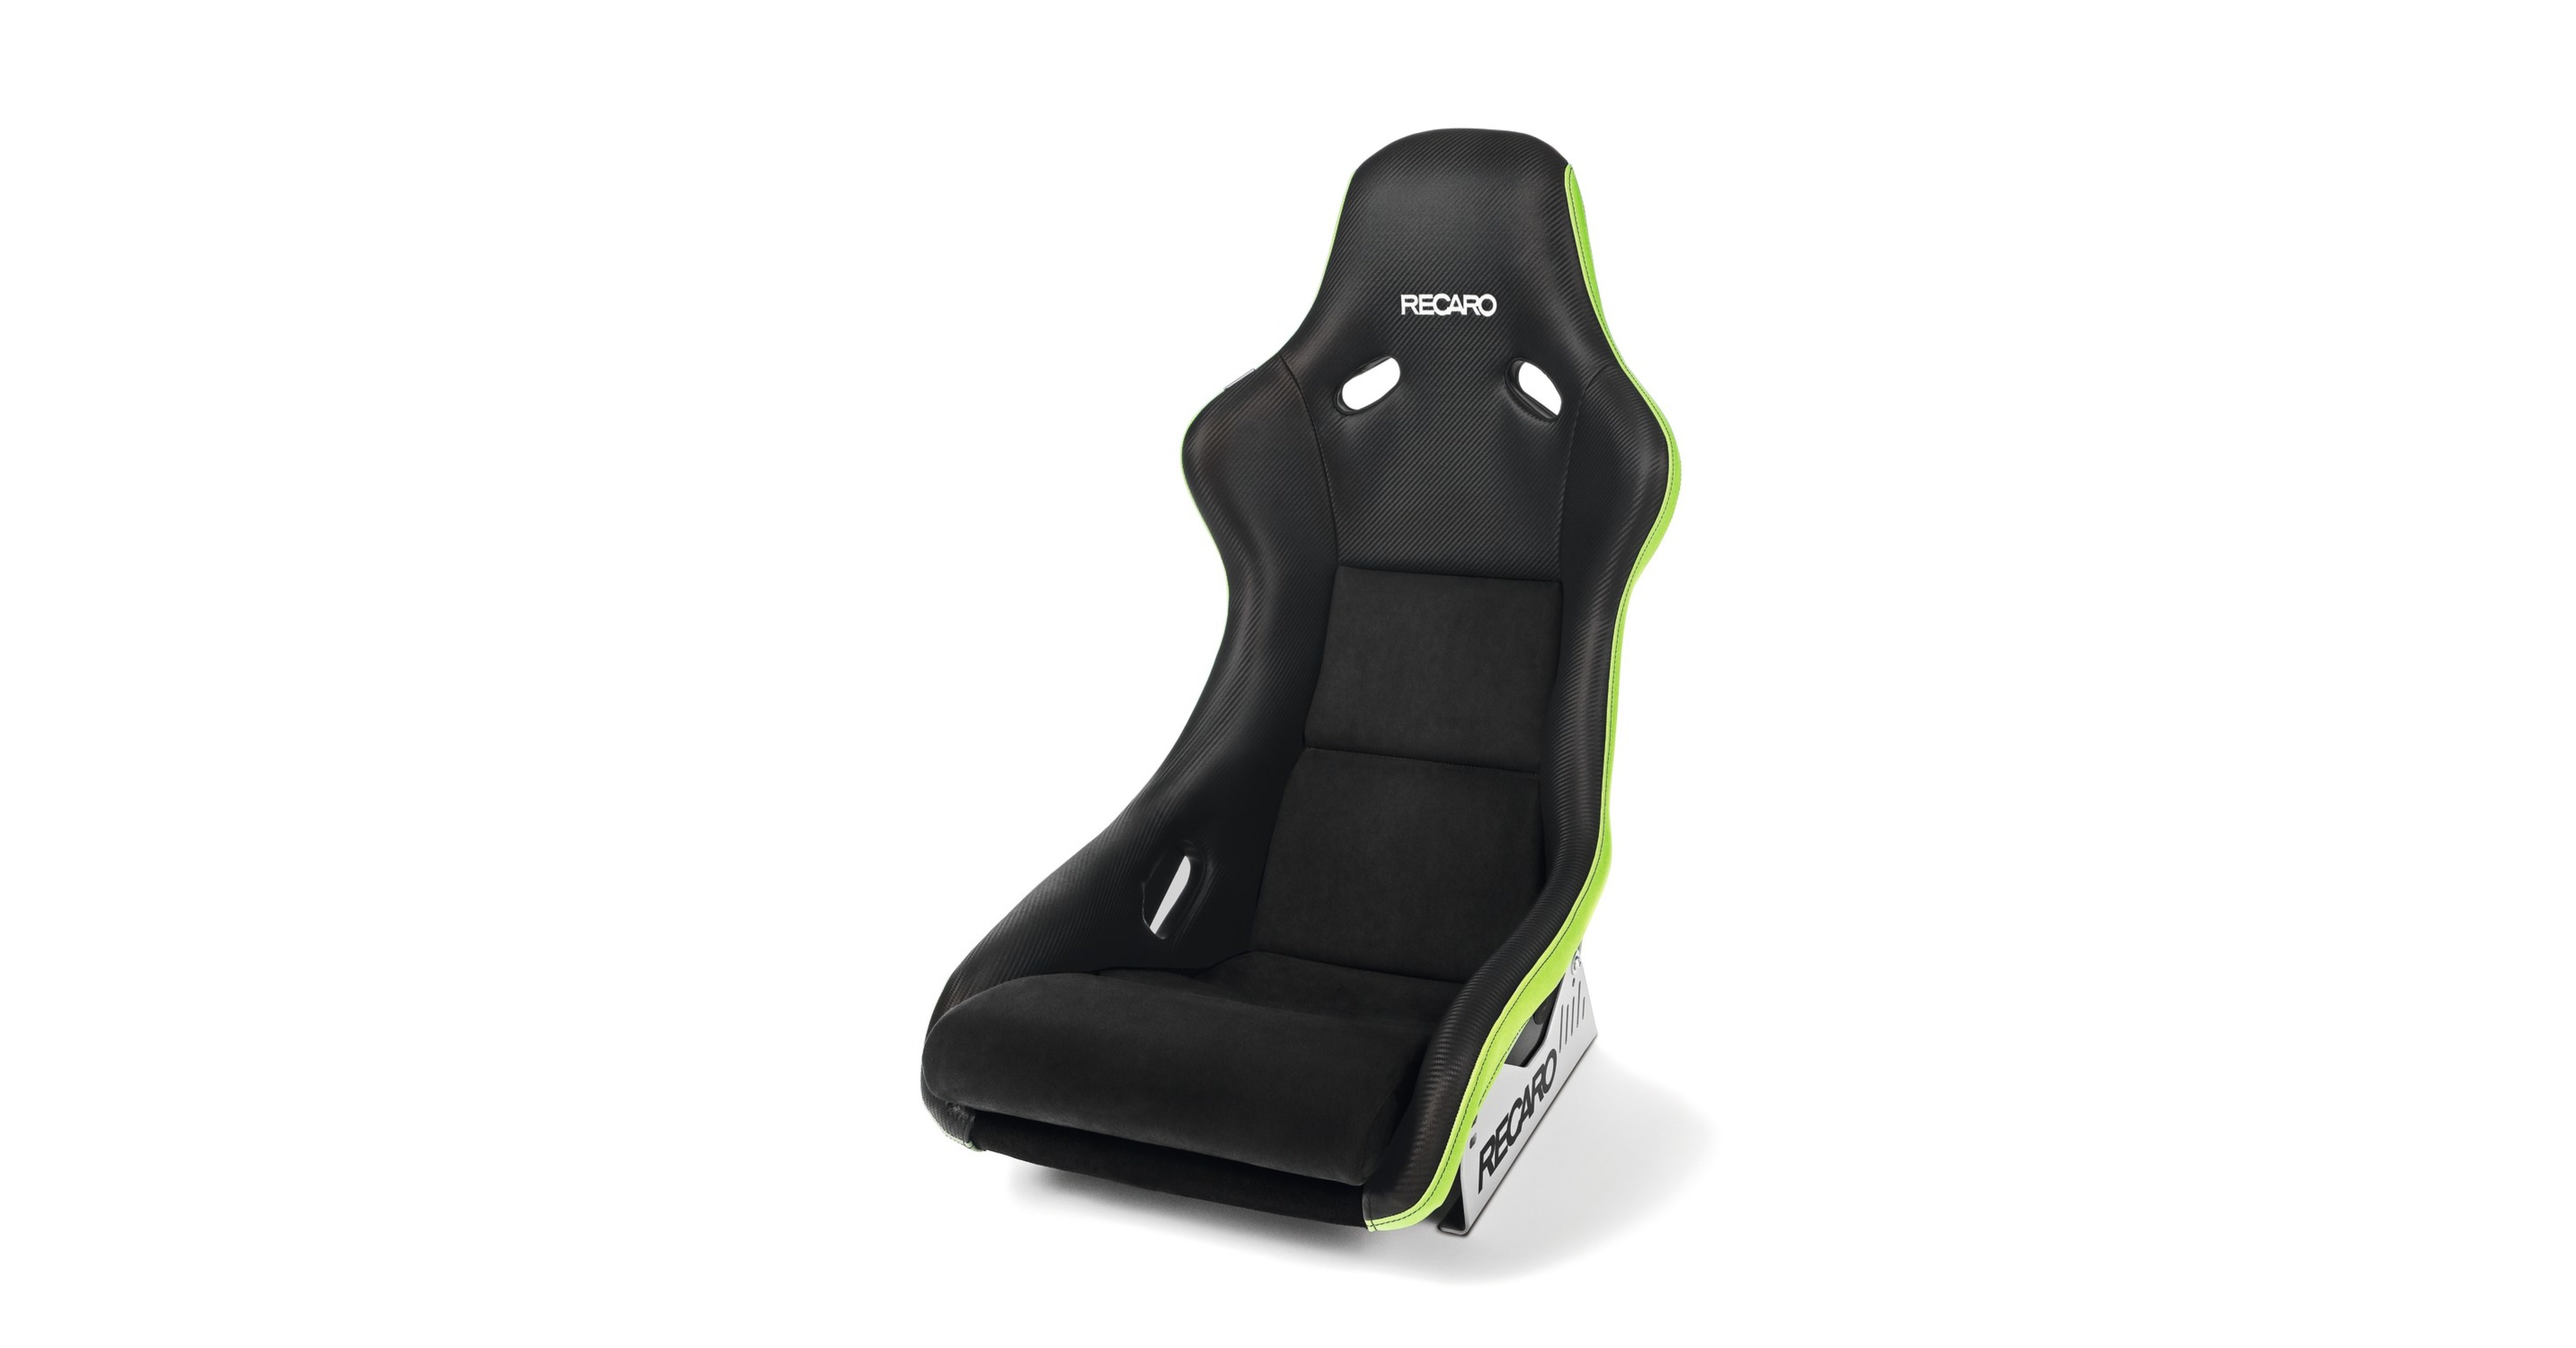 Seat cushions for RECARO POLE POSITION Other textiles - CarBone